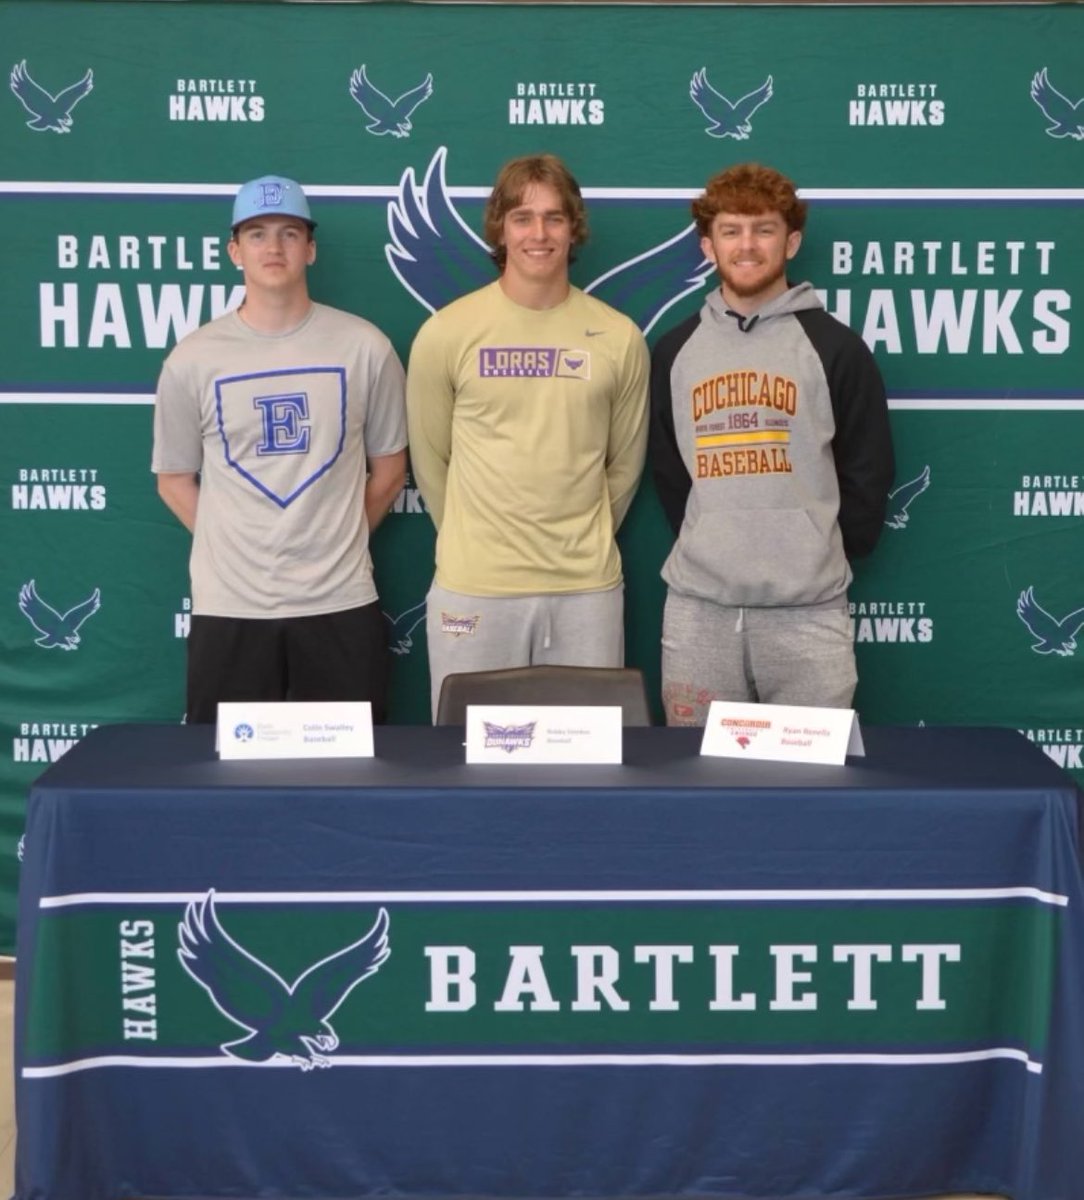 Huuuge congratulations to these 3 on signing their NLI to play college baseball next year. @ColinSwalley signing with @ElgCCBaseball1 @robby_stankus05 signing with @LorasBaseball @ryan_renella signing with @CUCbaseball Extremely proud of this 3 young men!!